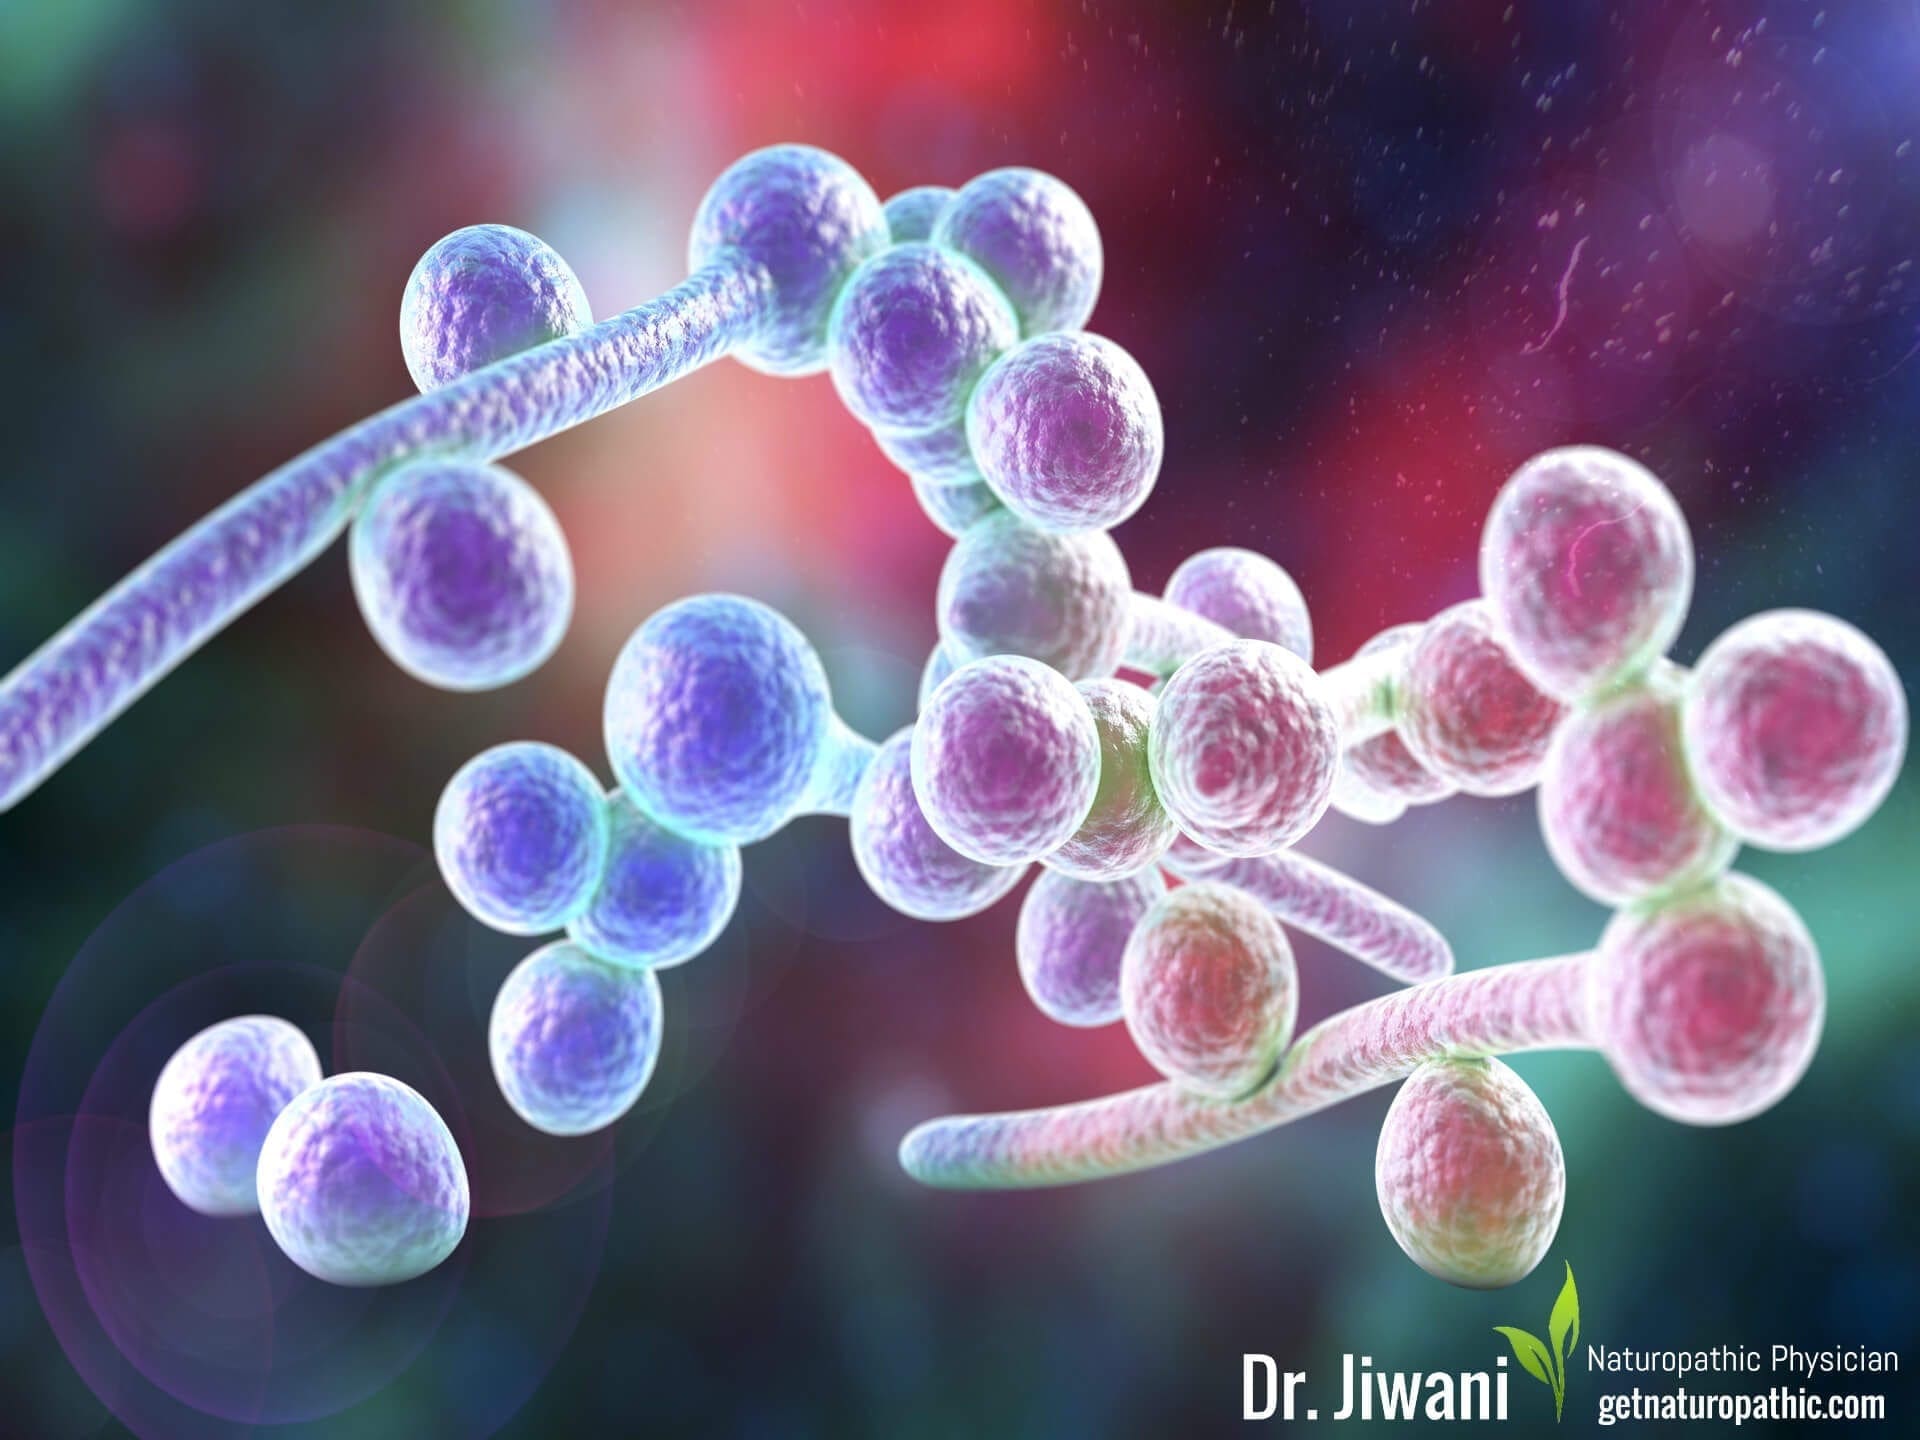 Yeast Infection Candidiasis Sugar the Sweet Poison: The Alarming Ways Sugar Damages Your Body & Brain* | Dr. Jiwani's Naturopathic Nuggets Blog